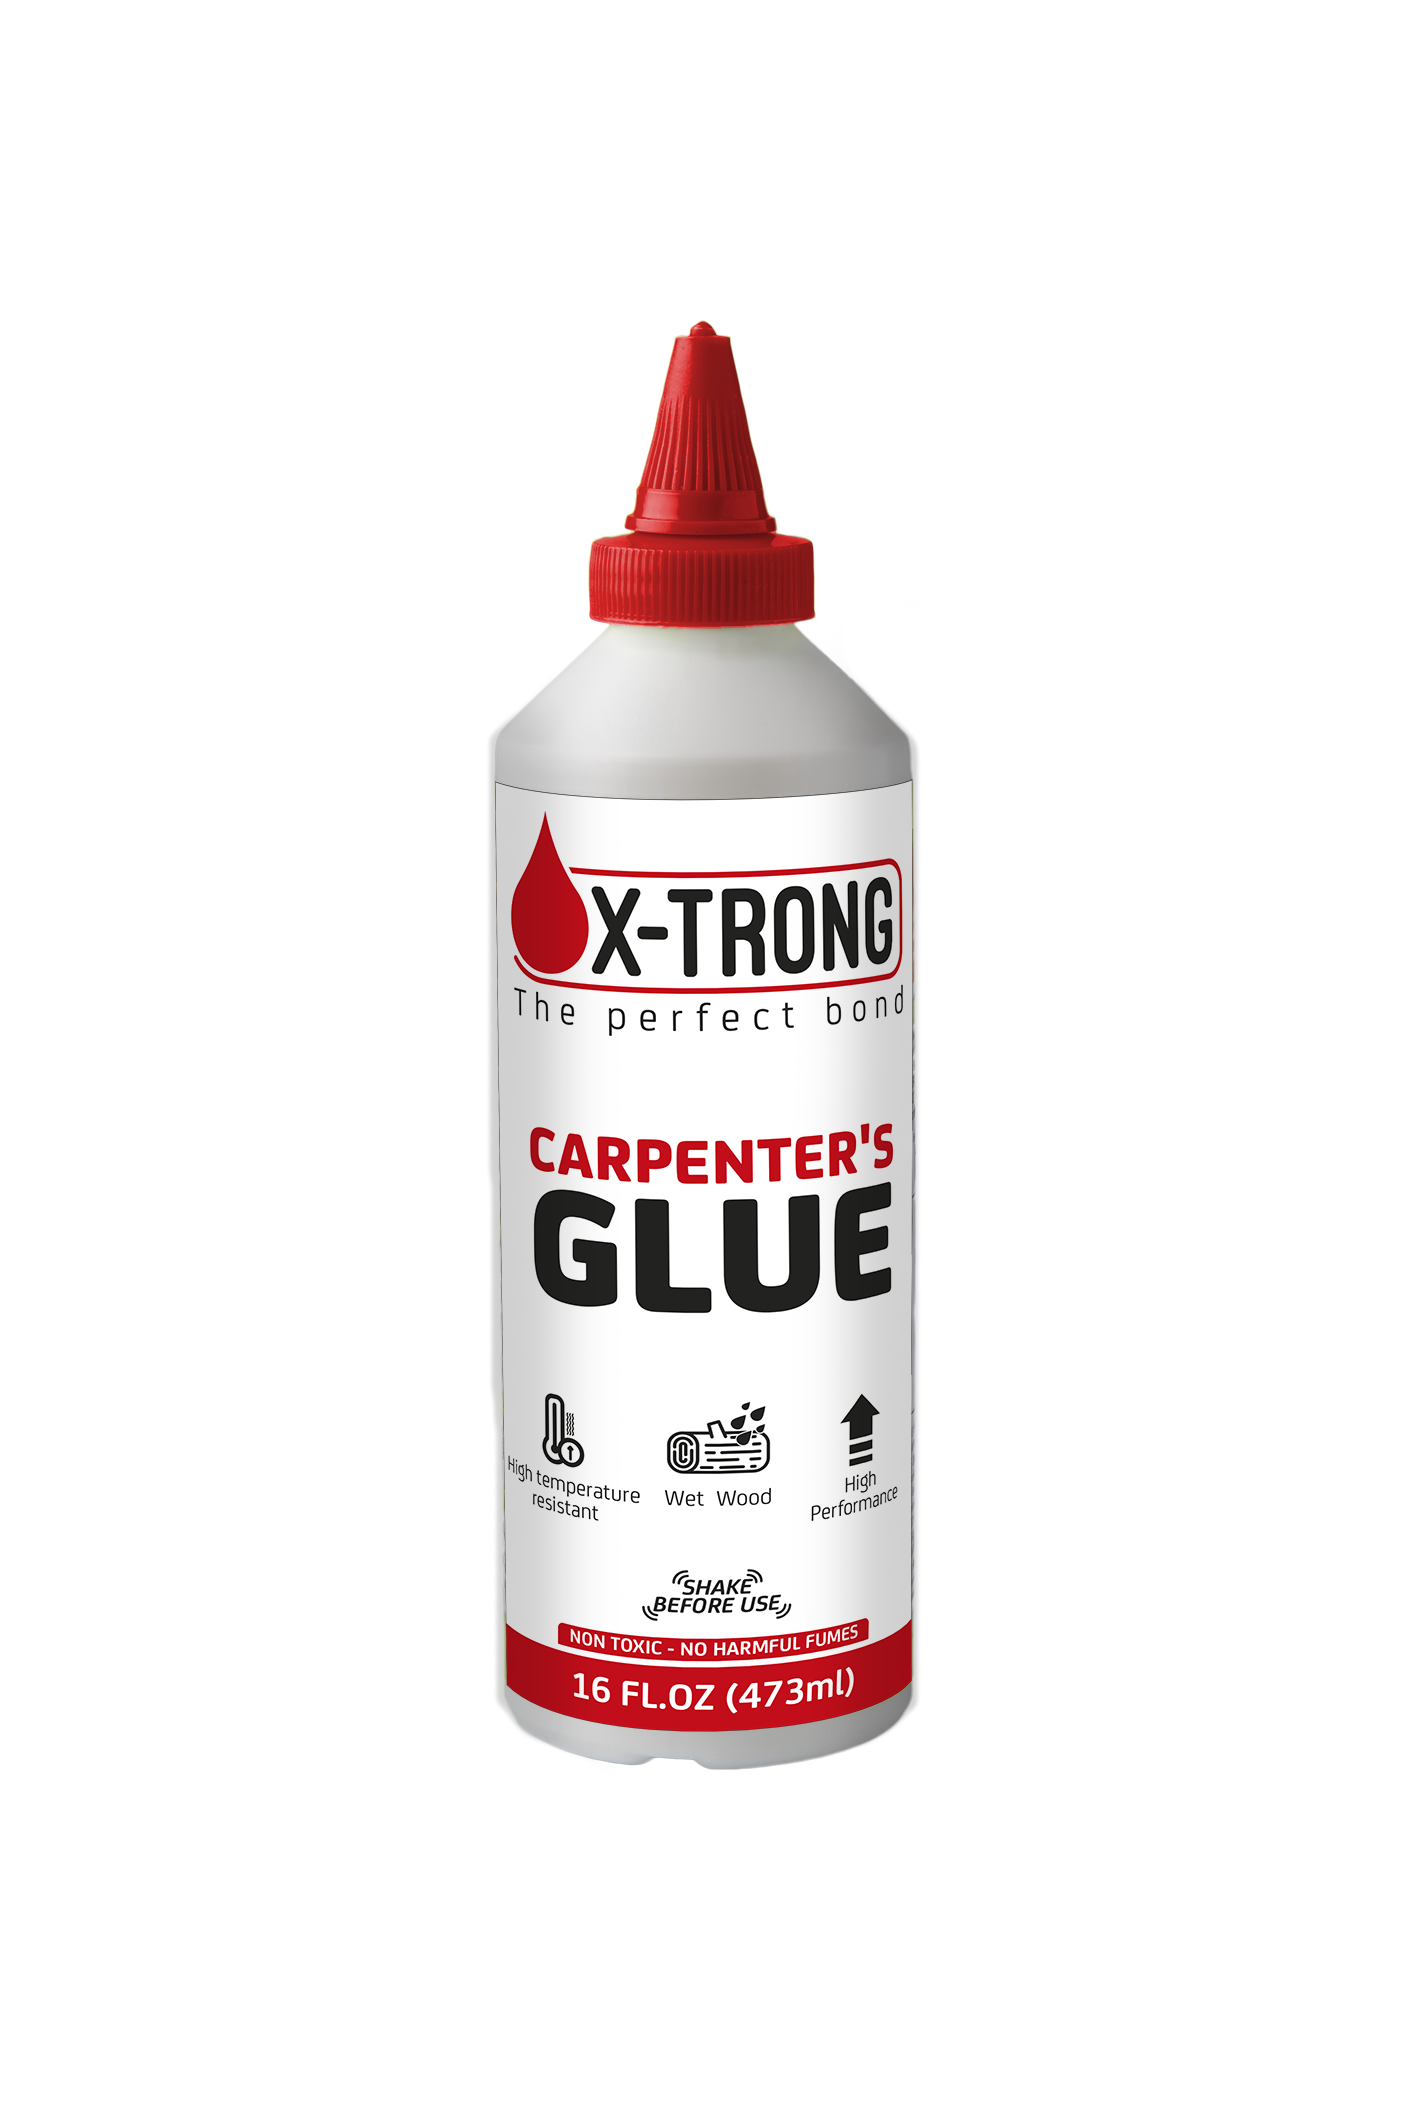 What Materials Does Carpenters Glue Bond Well With